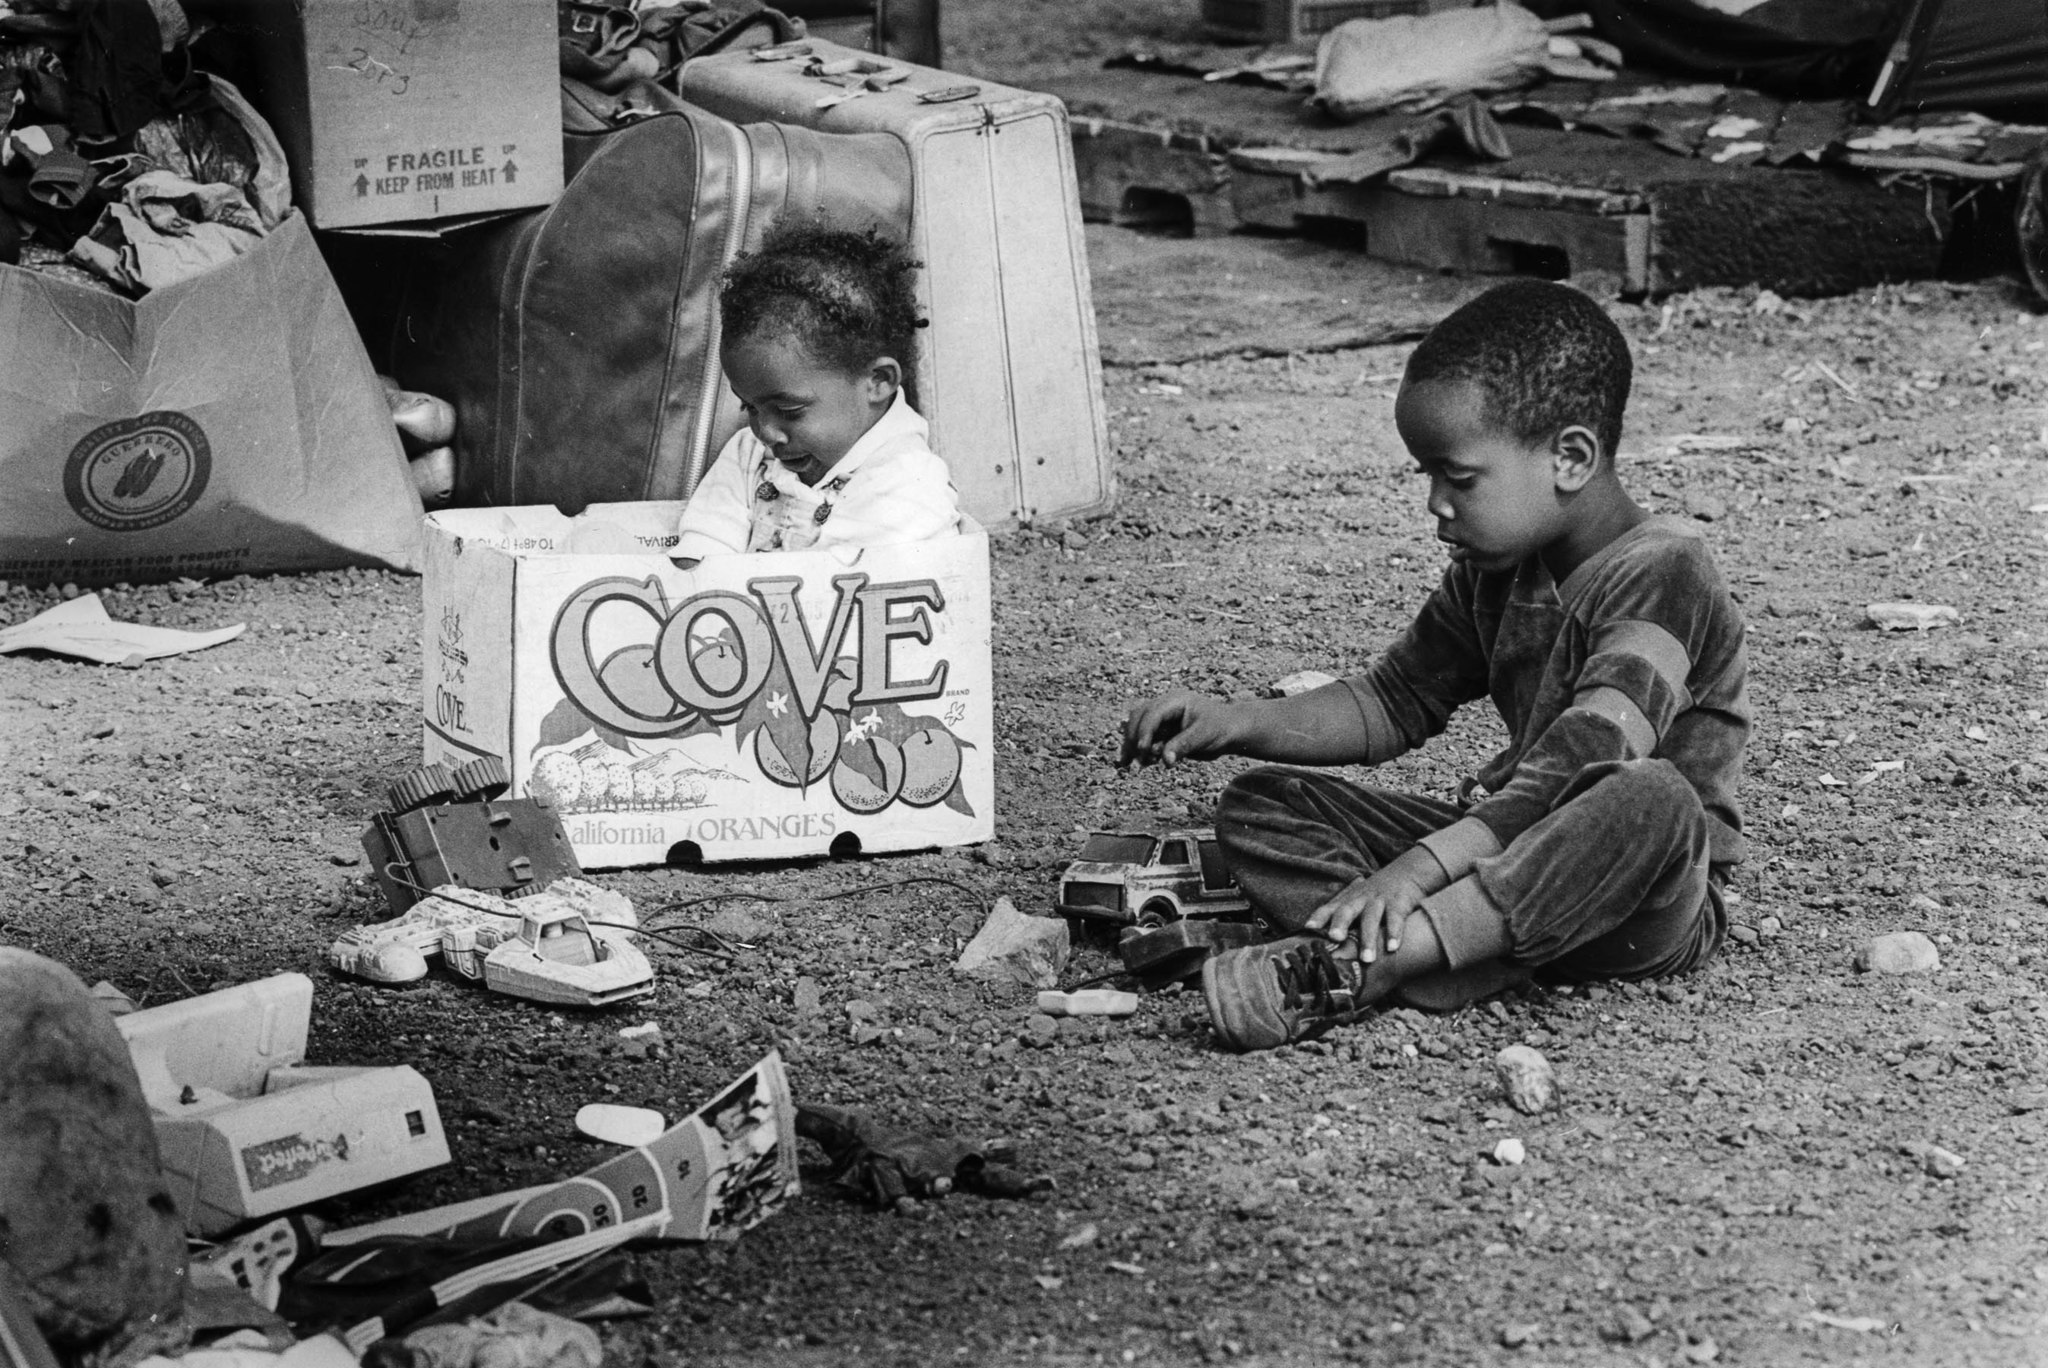 June 26, 1987: Two children play with toys and an empty box at the Urban Campground. This photo was